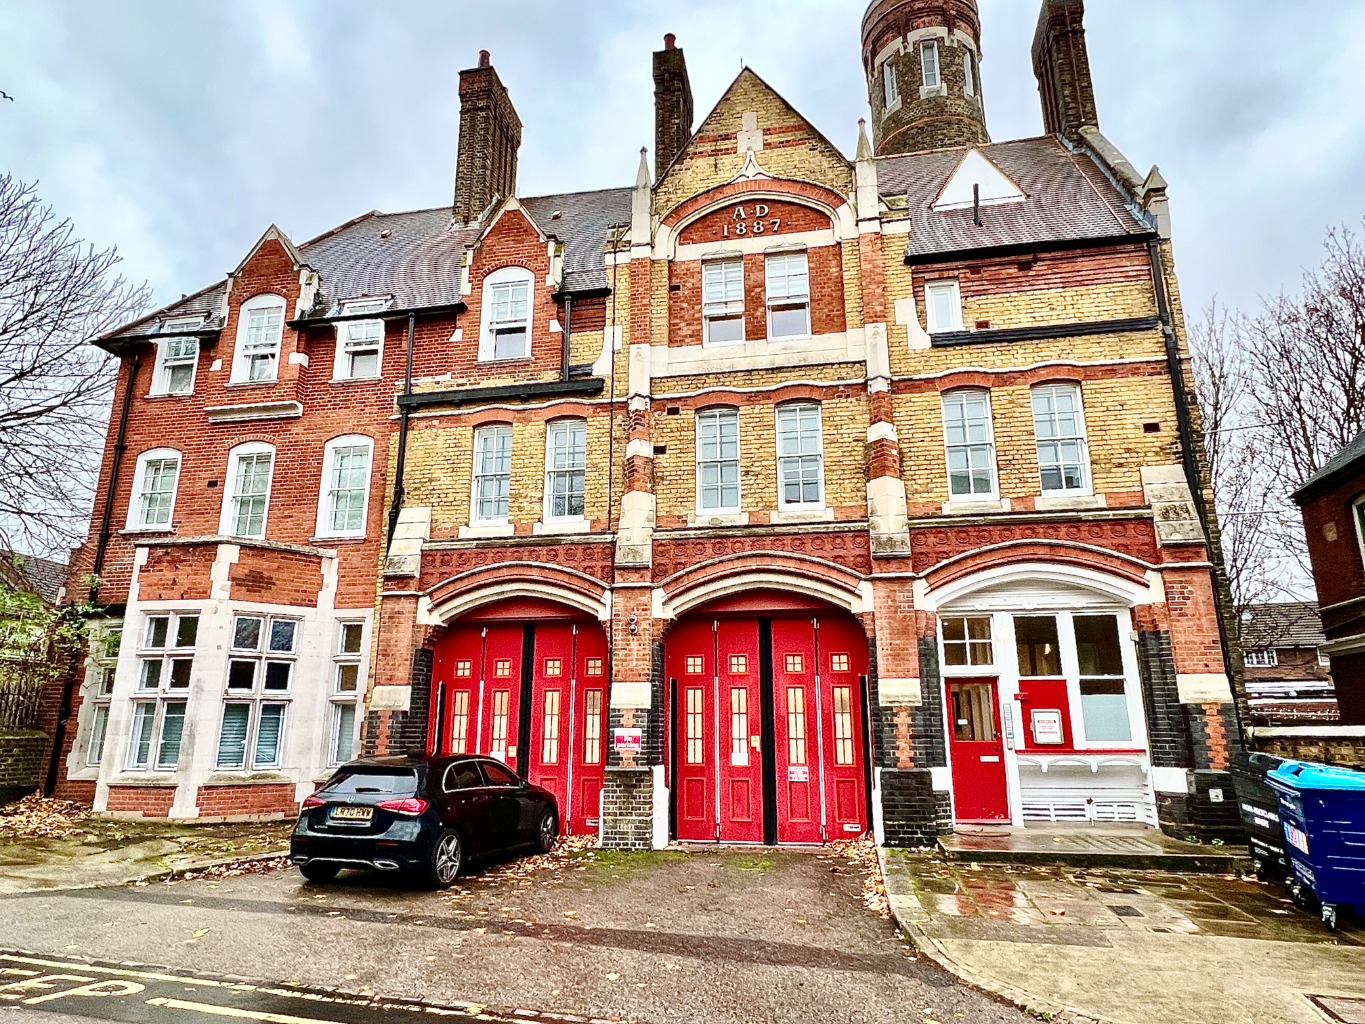 Available from early February, Beaumont Gibbs are delighted to offer this one bedroomed second floor flat to let in Sunbury Street Woolwich.